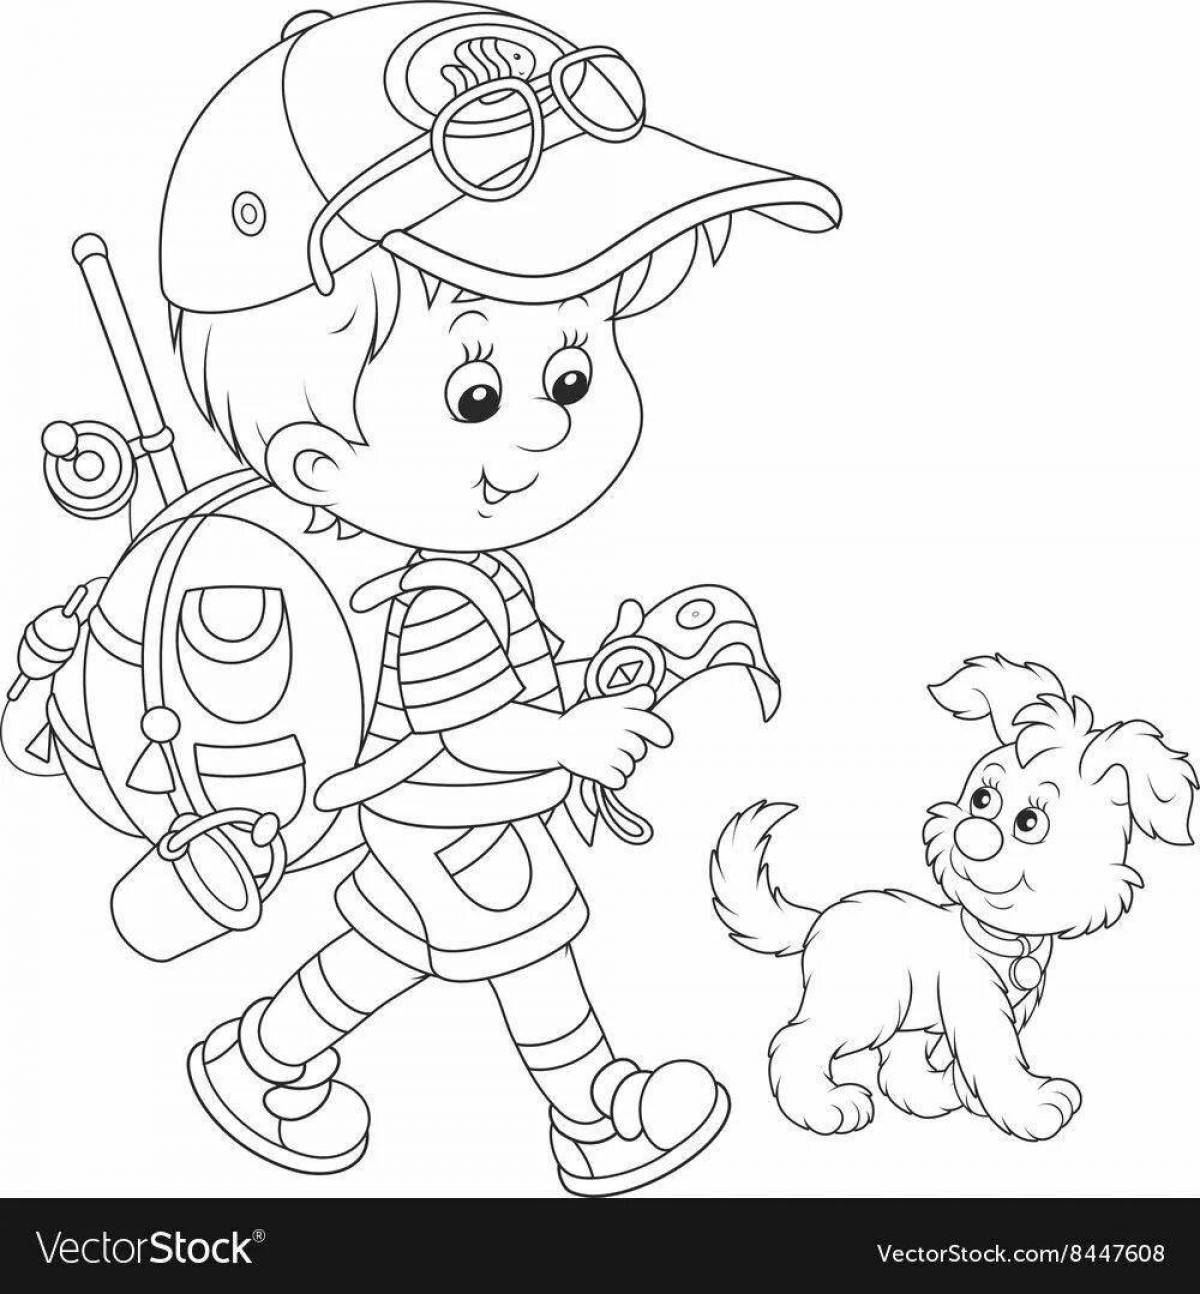 Awesome travel coloring book for kids